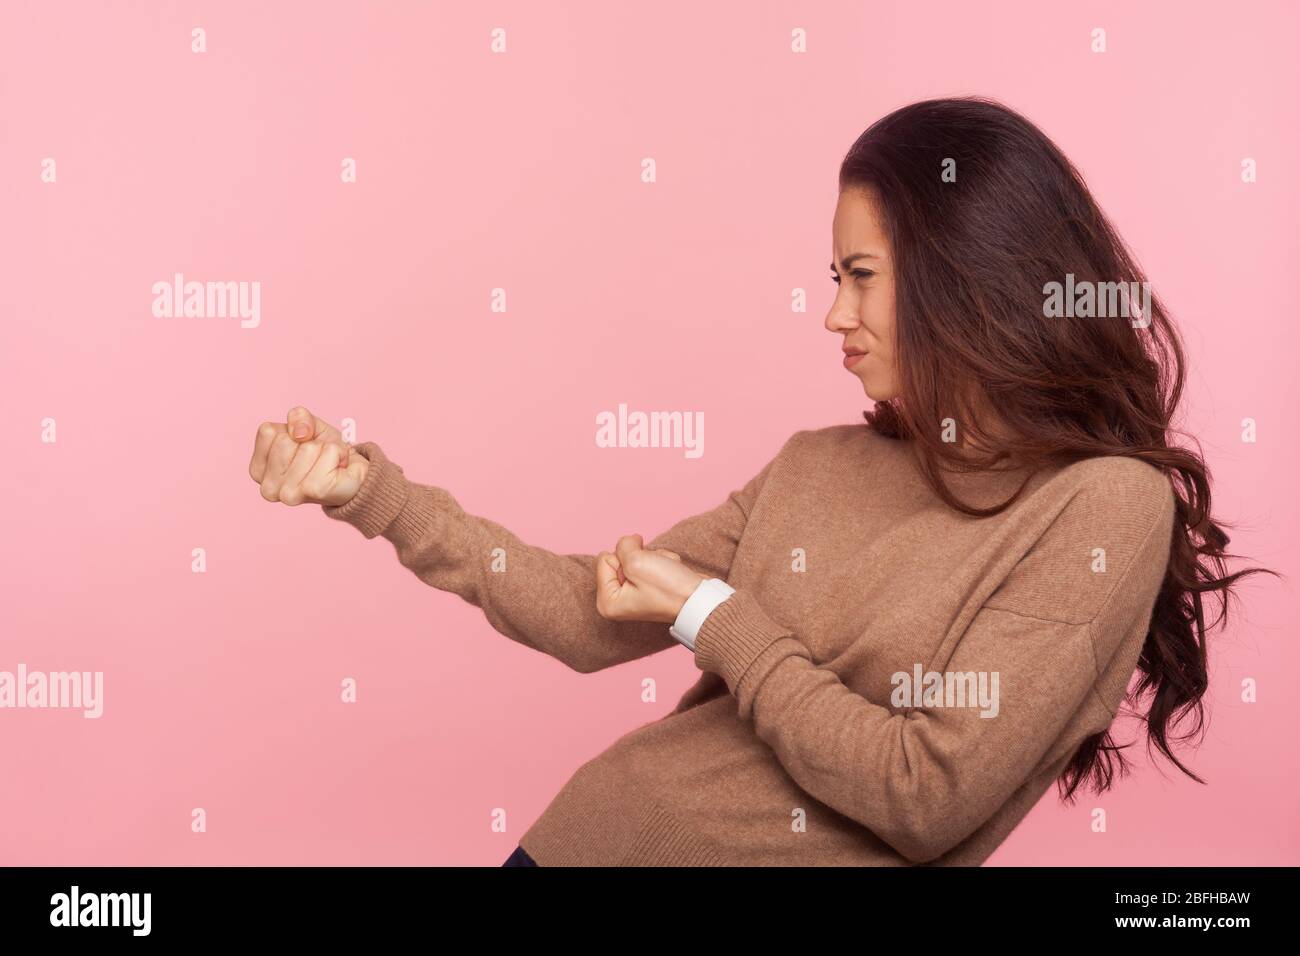 Portrait of diligent purposeful young woman with brunette hair pretending to pull invisible rope, holding something heavy with expression of great eff Stock Photo